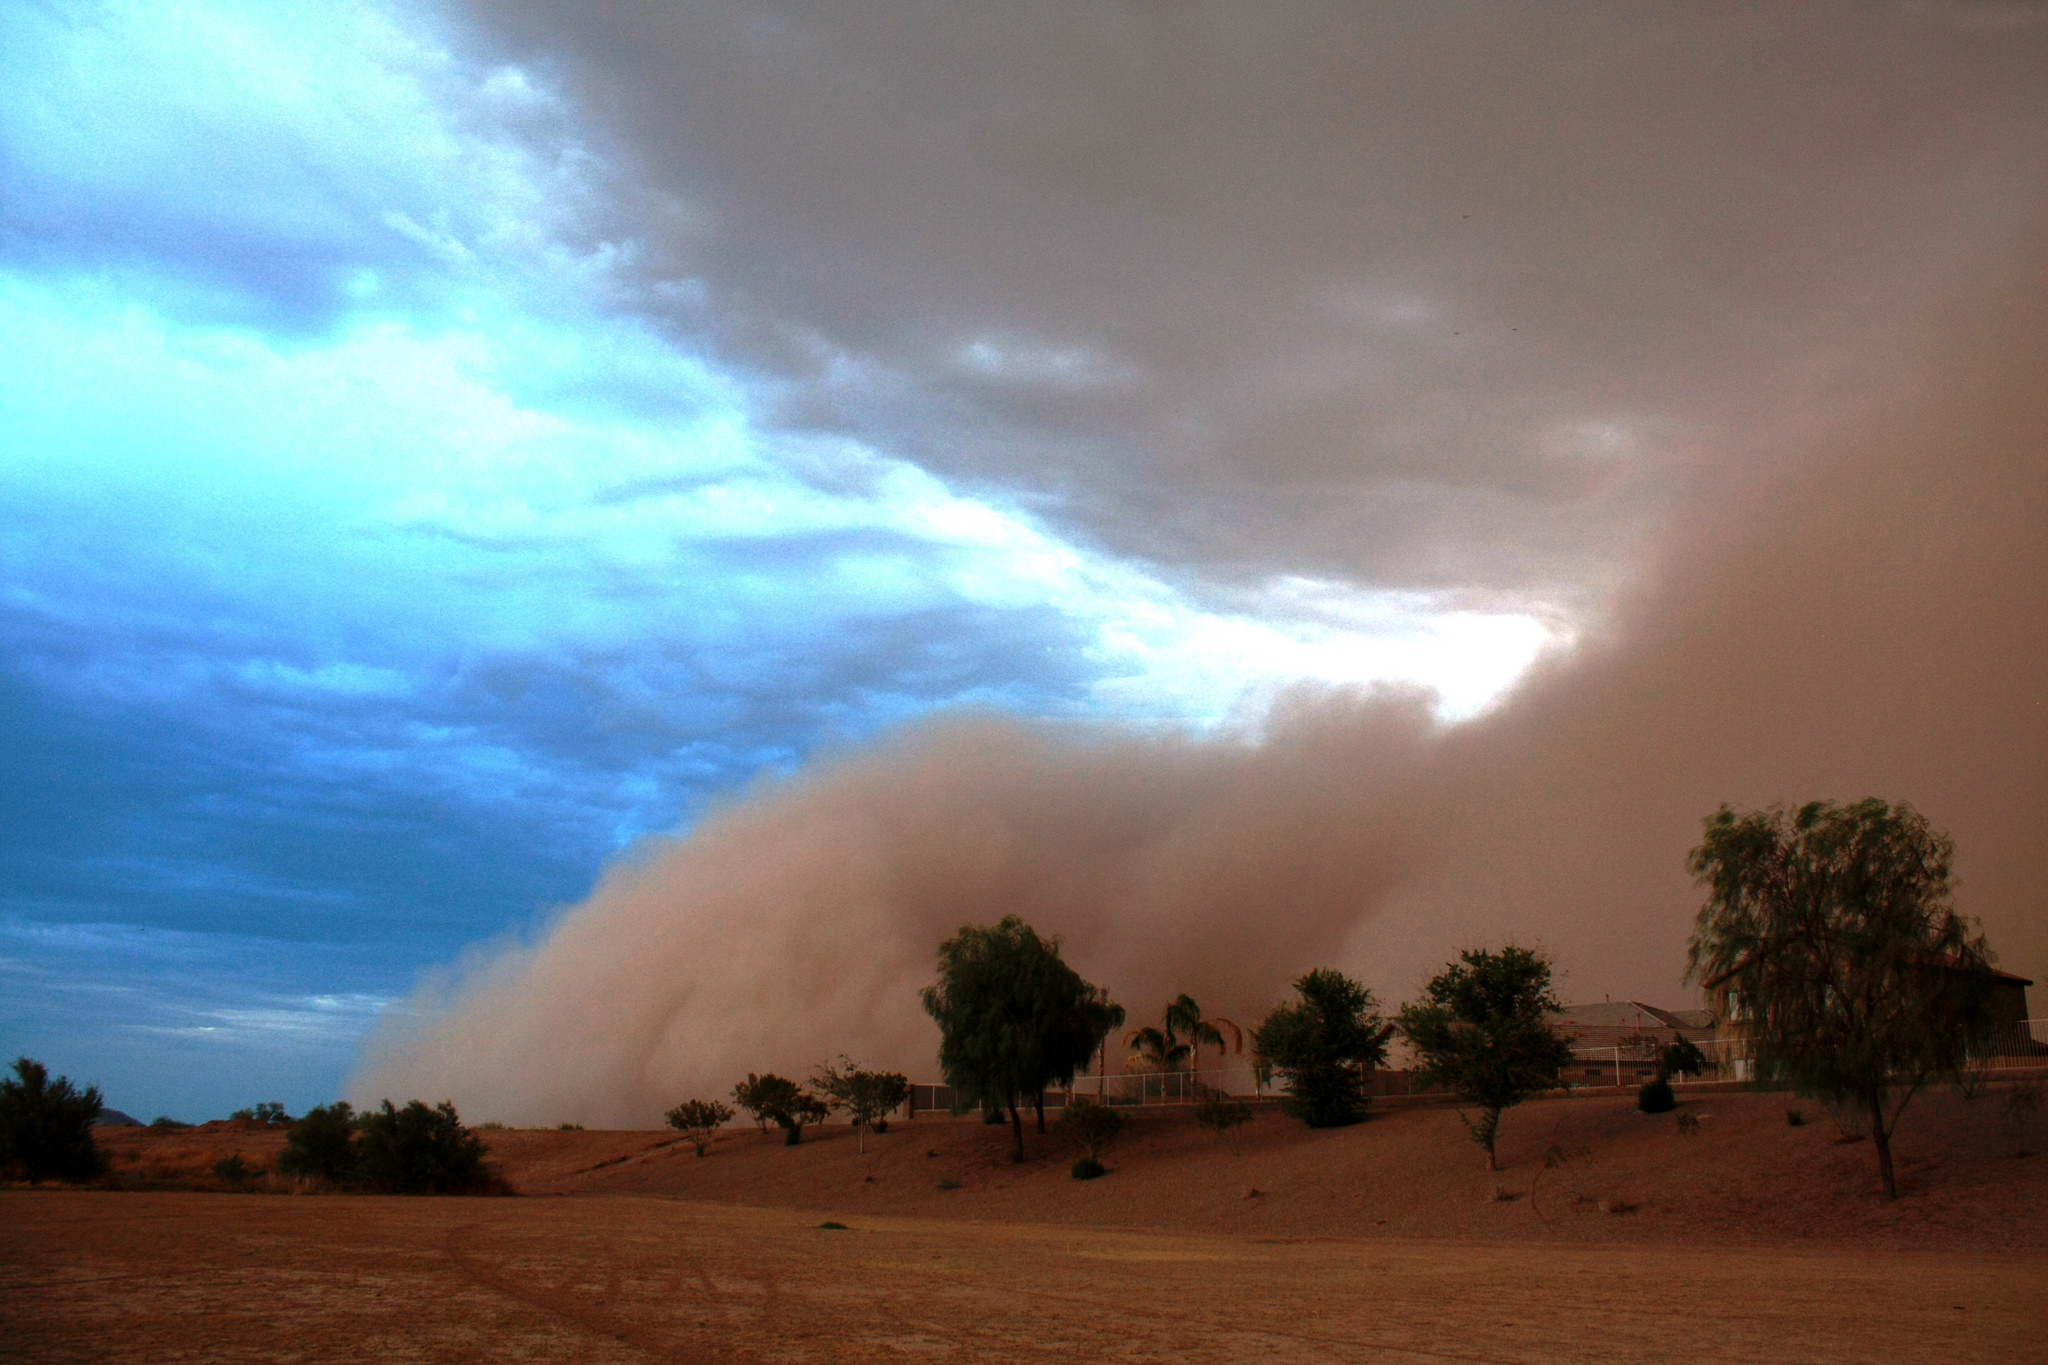 A huge dust storm approaching